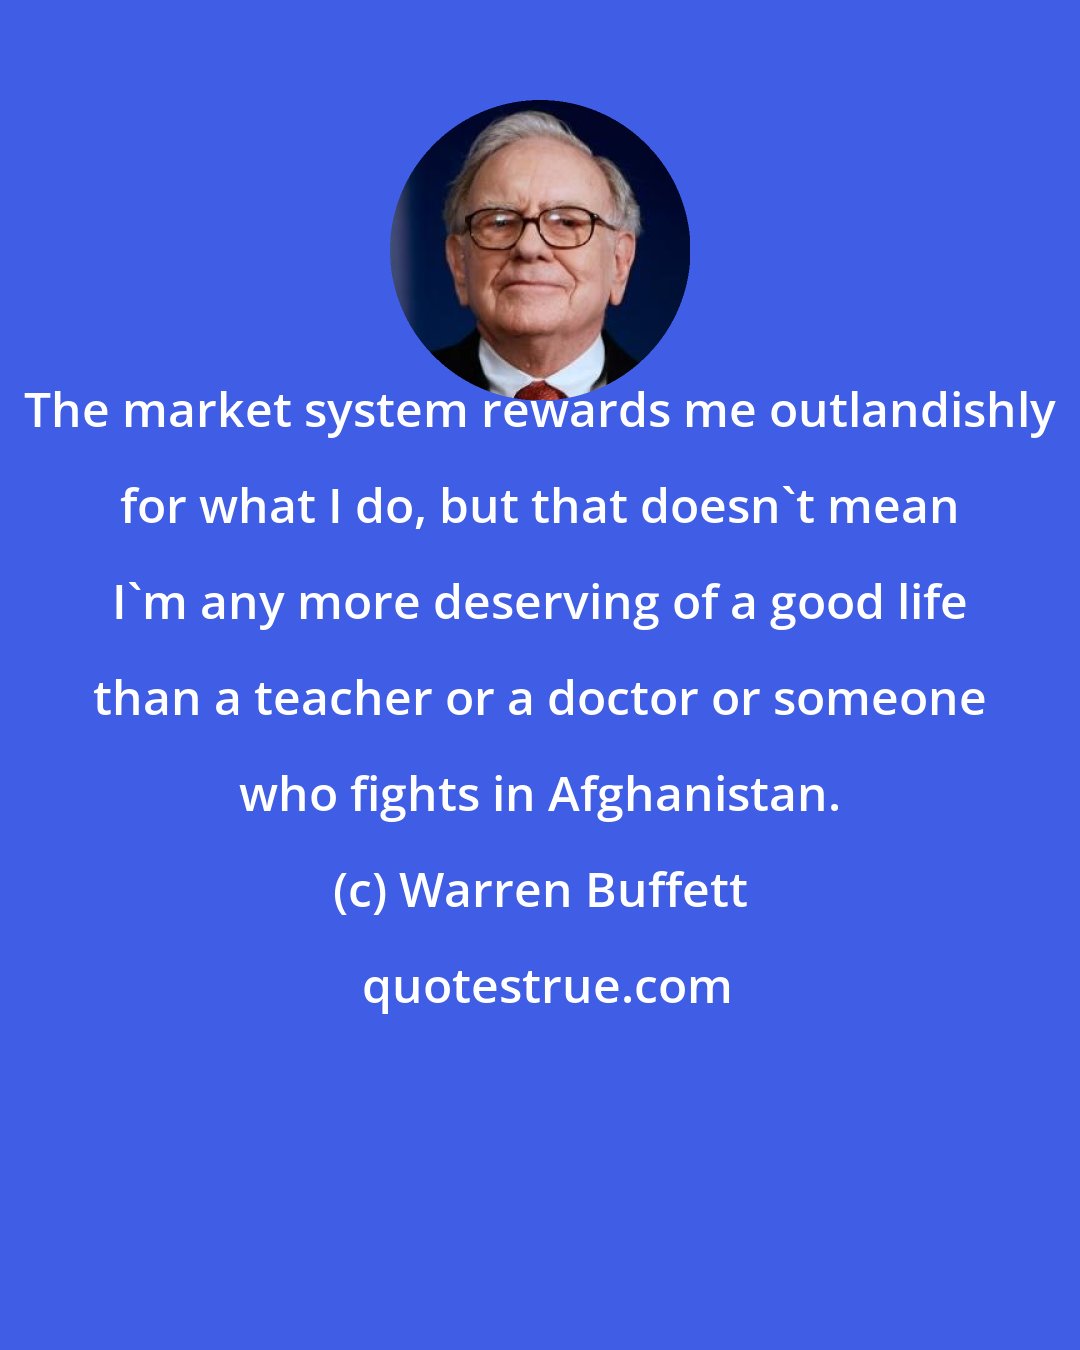 Warren Buffett: The market system rewards me outlandishly for what I do, but that doesn't mean I'm any more deserving of a good life than a teacher or a doctor or someone who fights in Afghanistan.